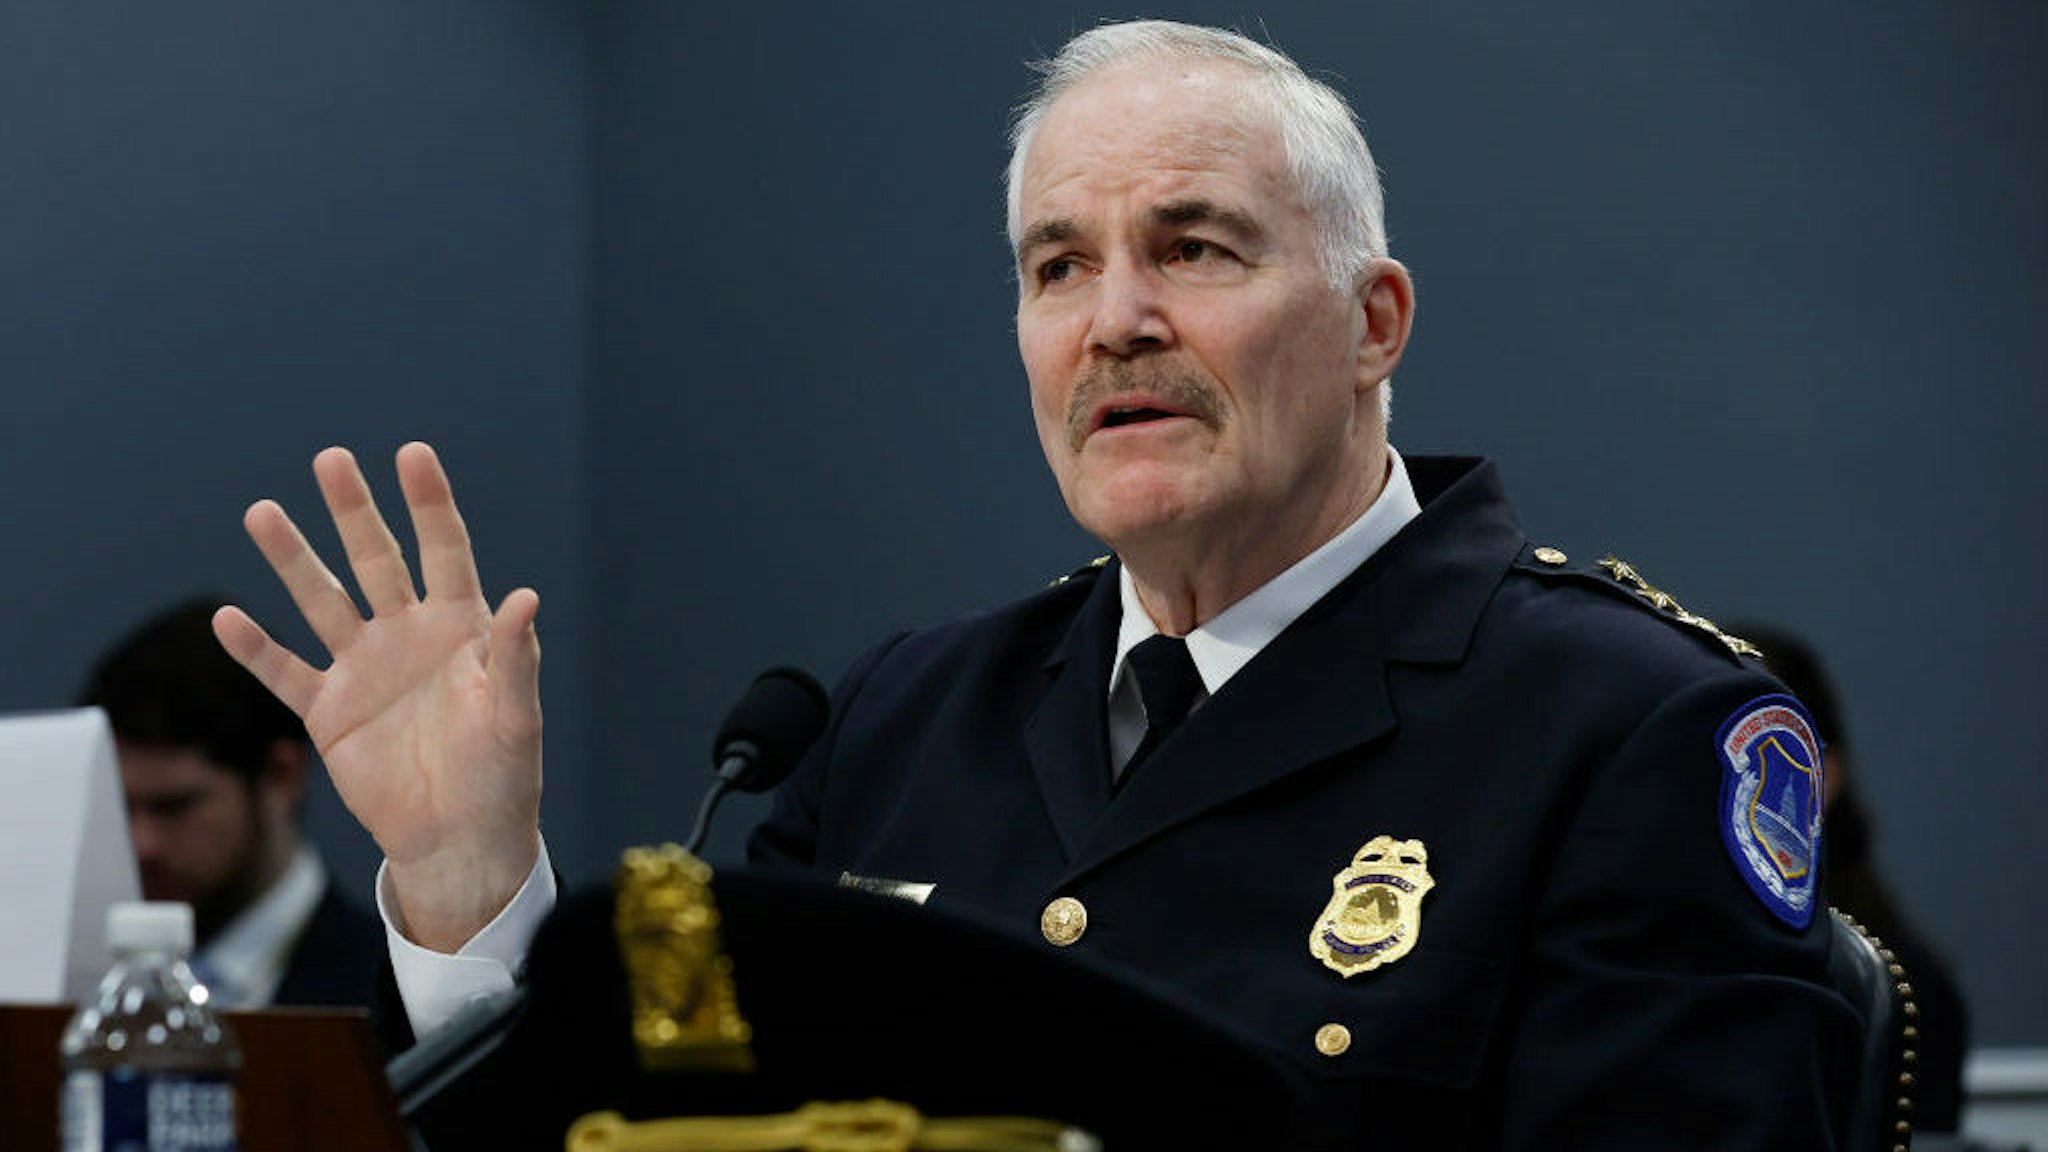 WASHINGTON, DC - MARCH 30: U.S. Capitol Police Chief Thomas Manger testifies before the House Appropriations Legislative Branch Subcommittee in the Rayburn House Office Building on Capitol Hill on March 30, 2022 in Washington, DC. Manger testified about the FY2023 budget in addition to the changes that have been made to improve the department's capabilities following the January 6, 2021 attacks on the Capitol. (Photo by Chip Somodevilla/Getty Images)